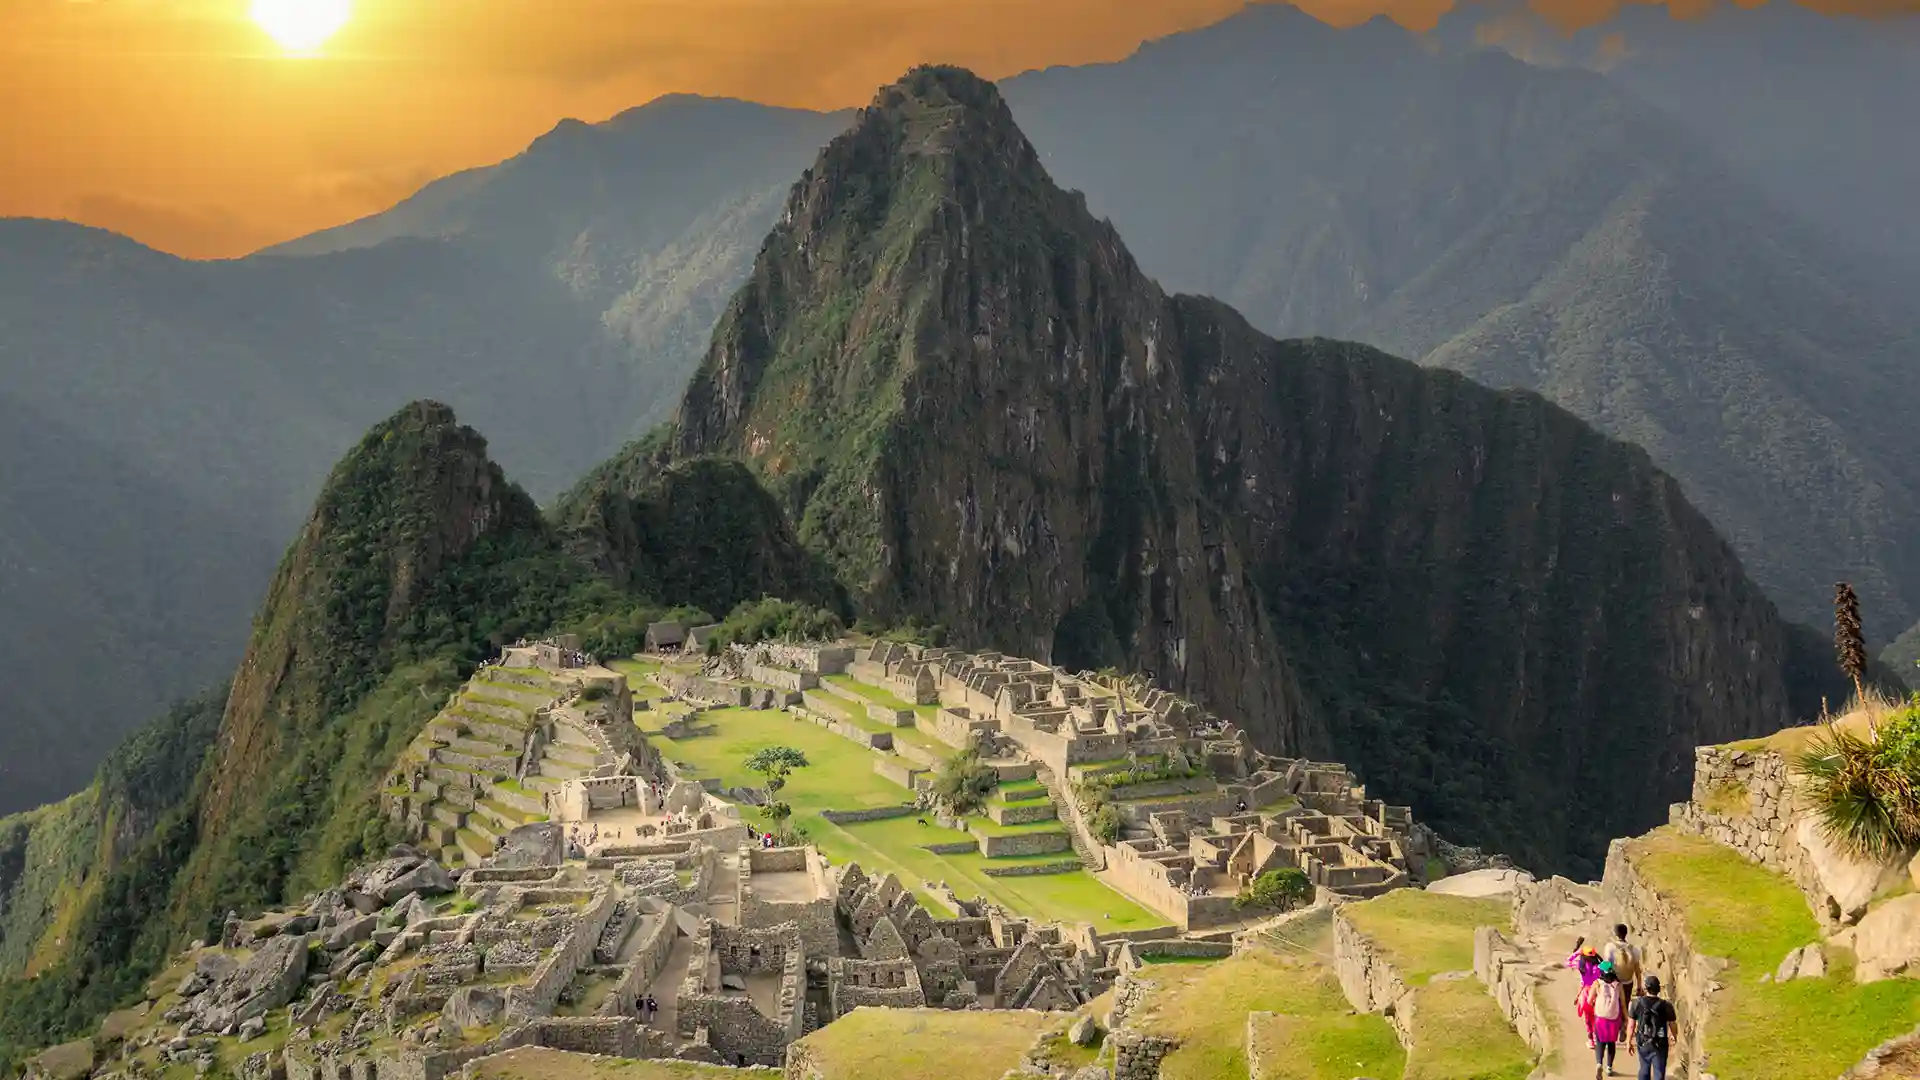 View of Machu Picchu, an ancient citadel in South America, surrounded by mountains and green landscape.